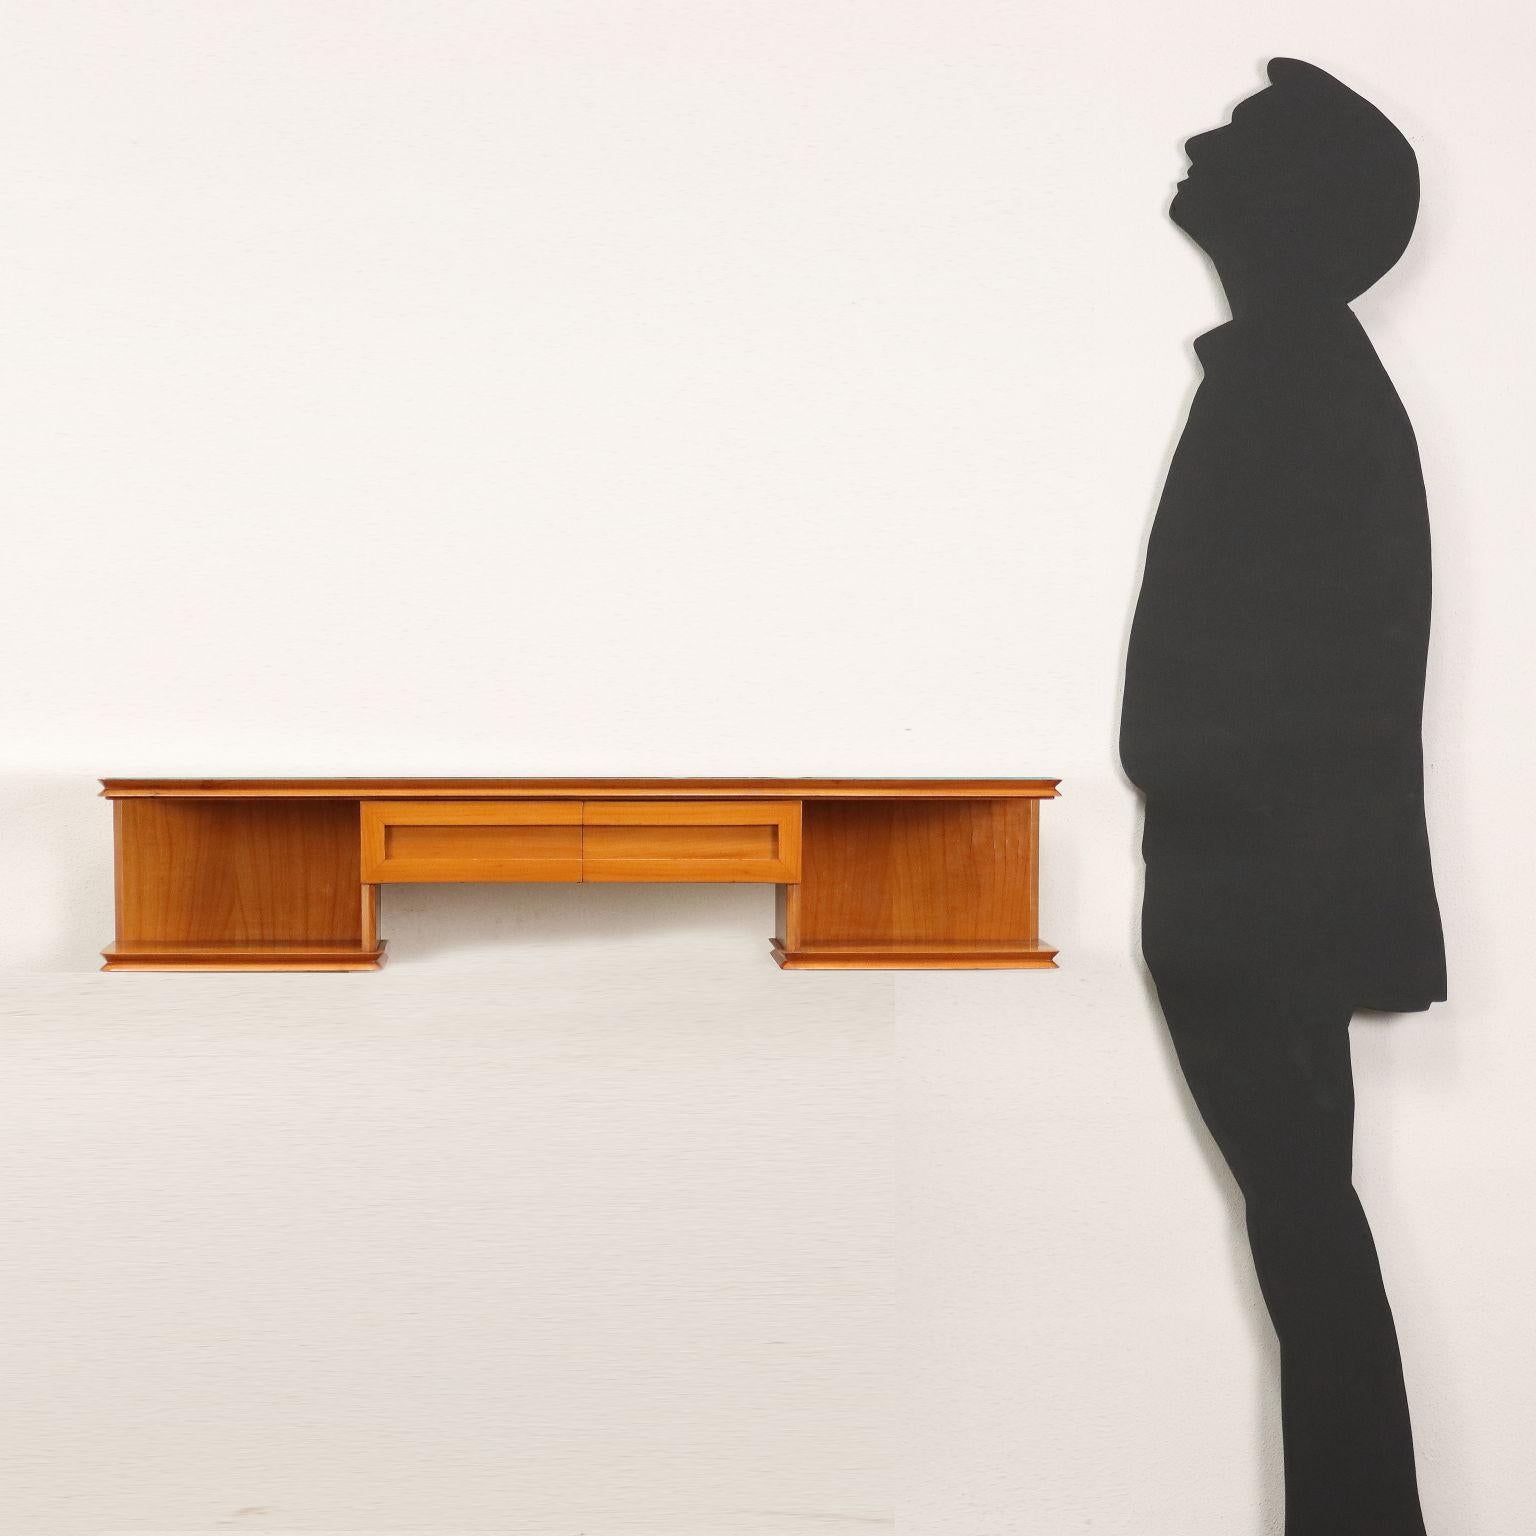 Hanging console with wall anchoring, visible drawers and open compartments; maple veneered wood, glass resting on the top.